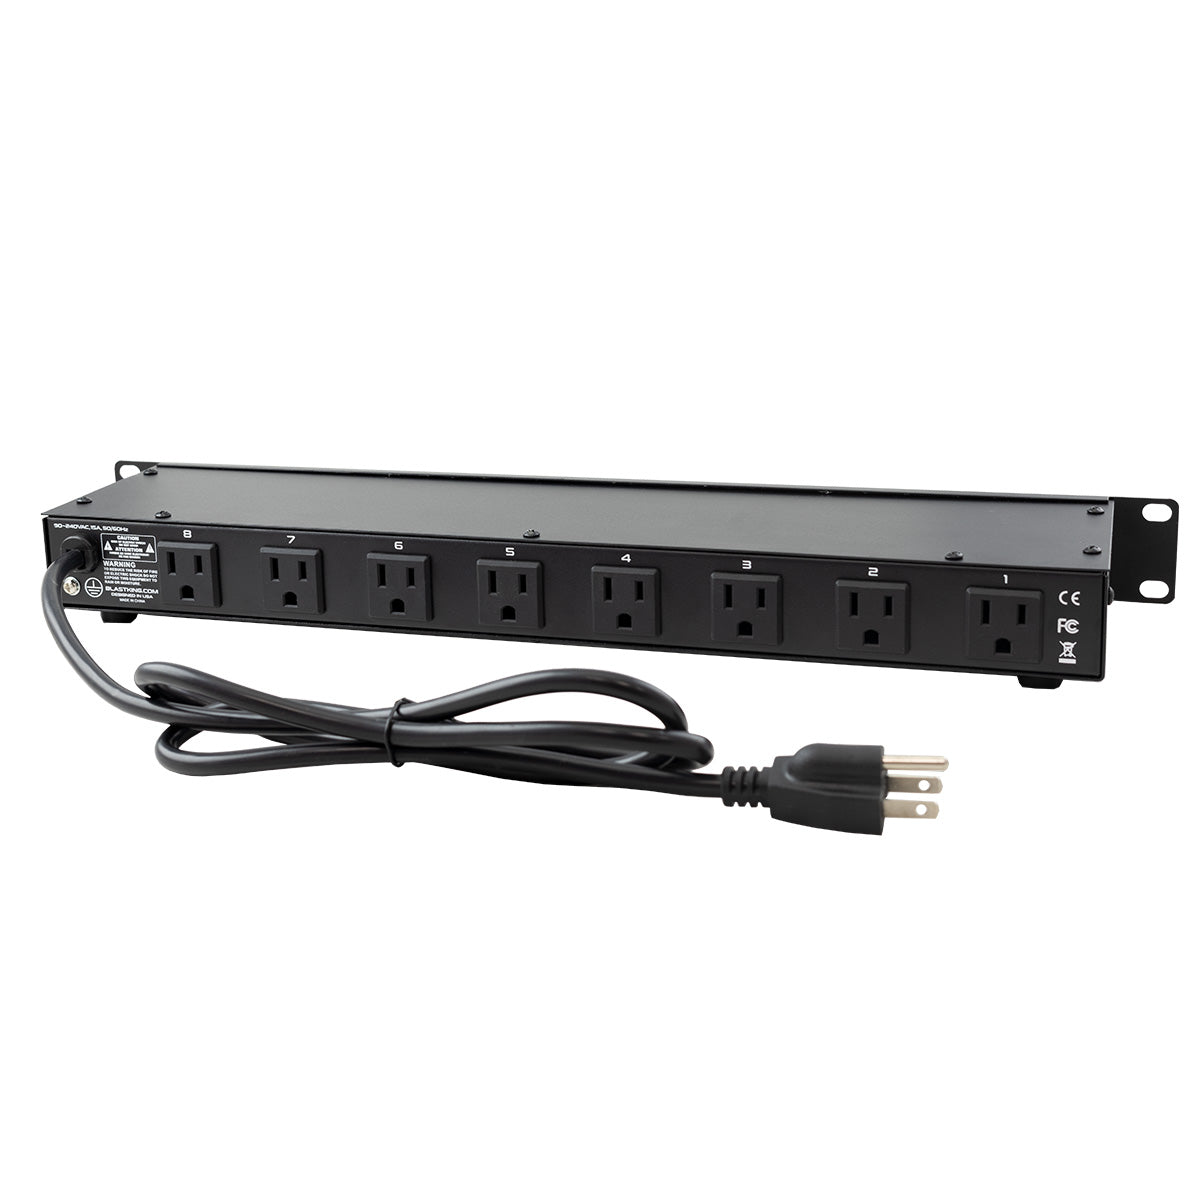 Blastking PC08-15 19 Inch Rack Power Center 8 Outlets and 2 USB Ports